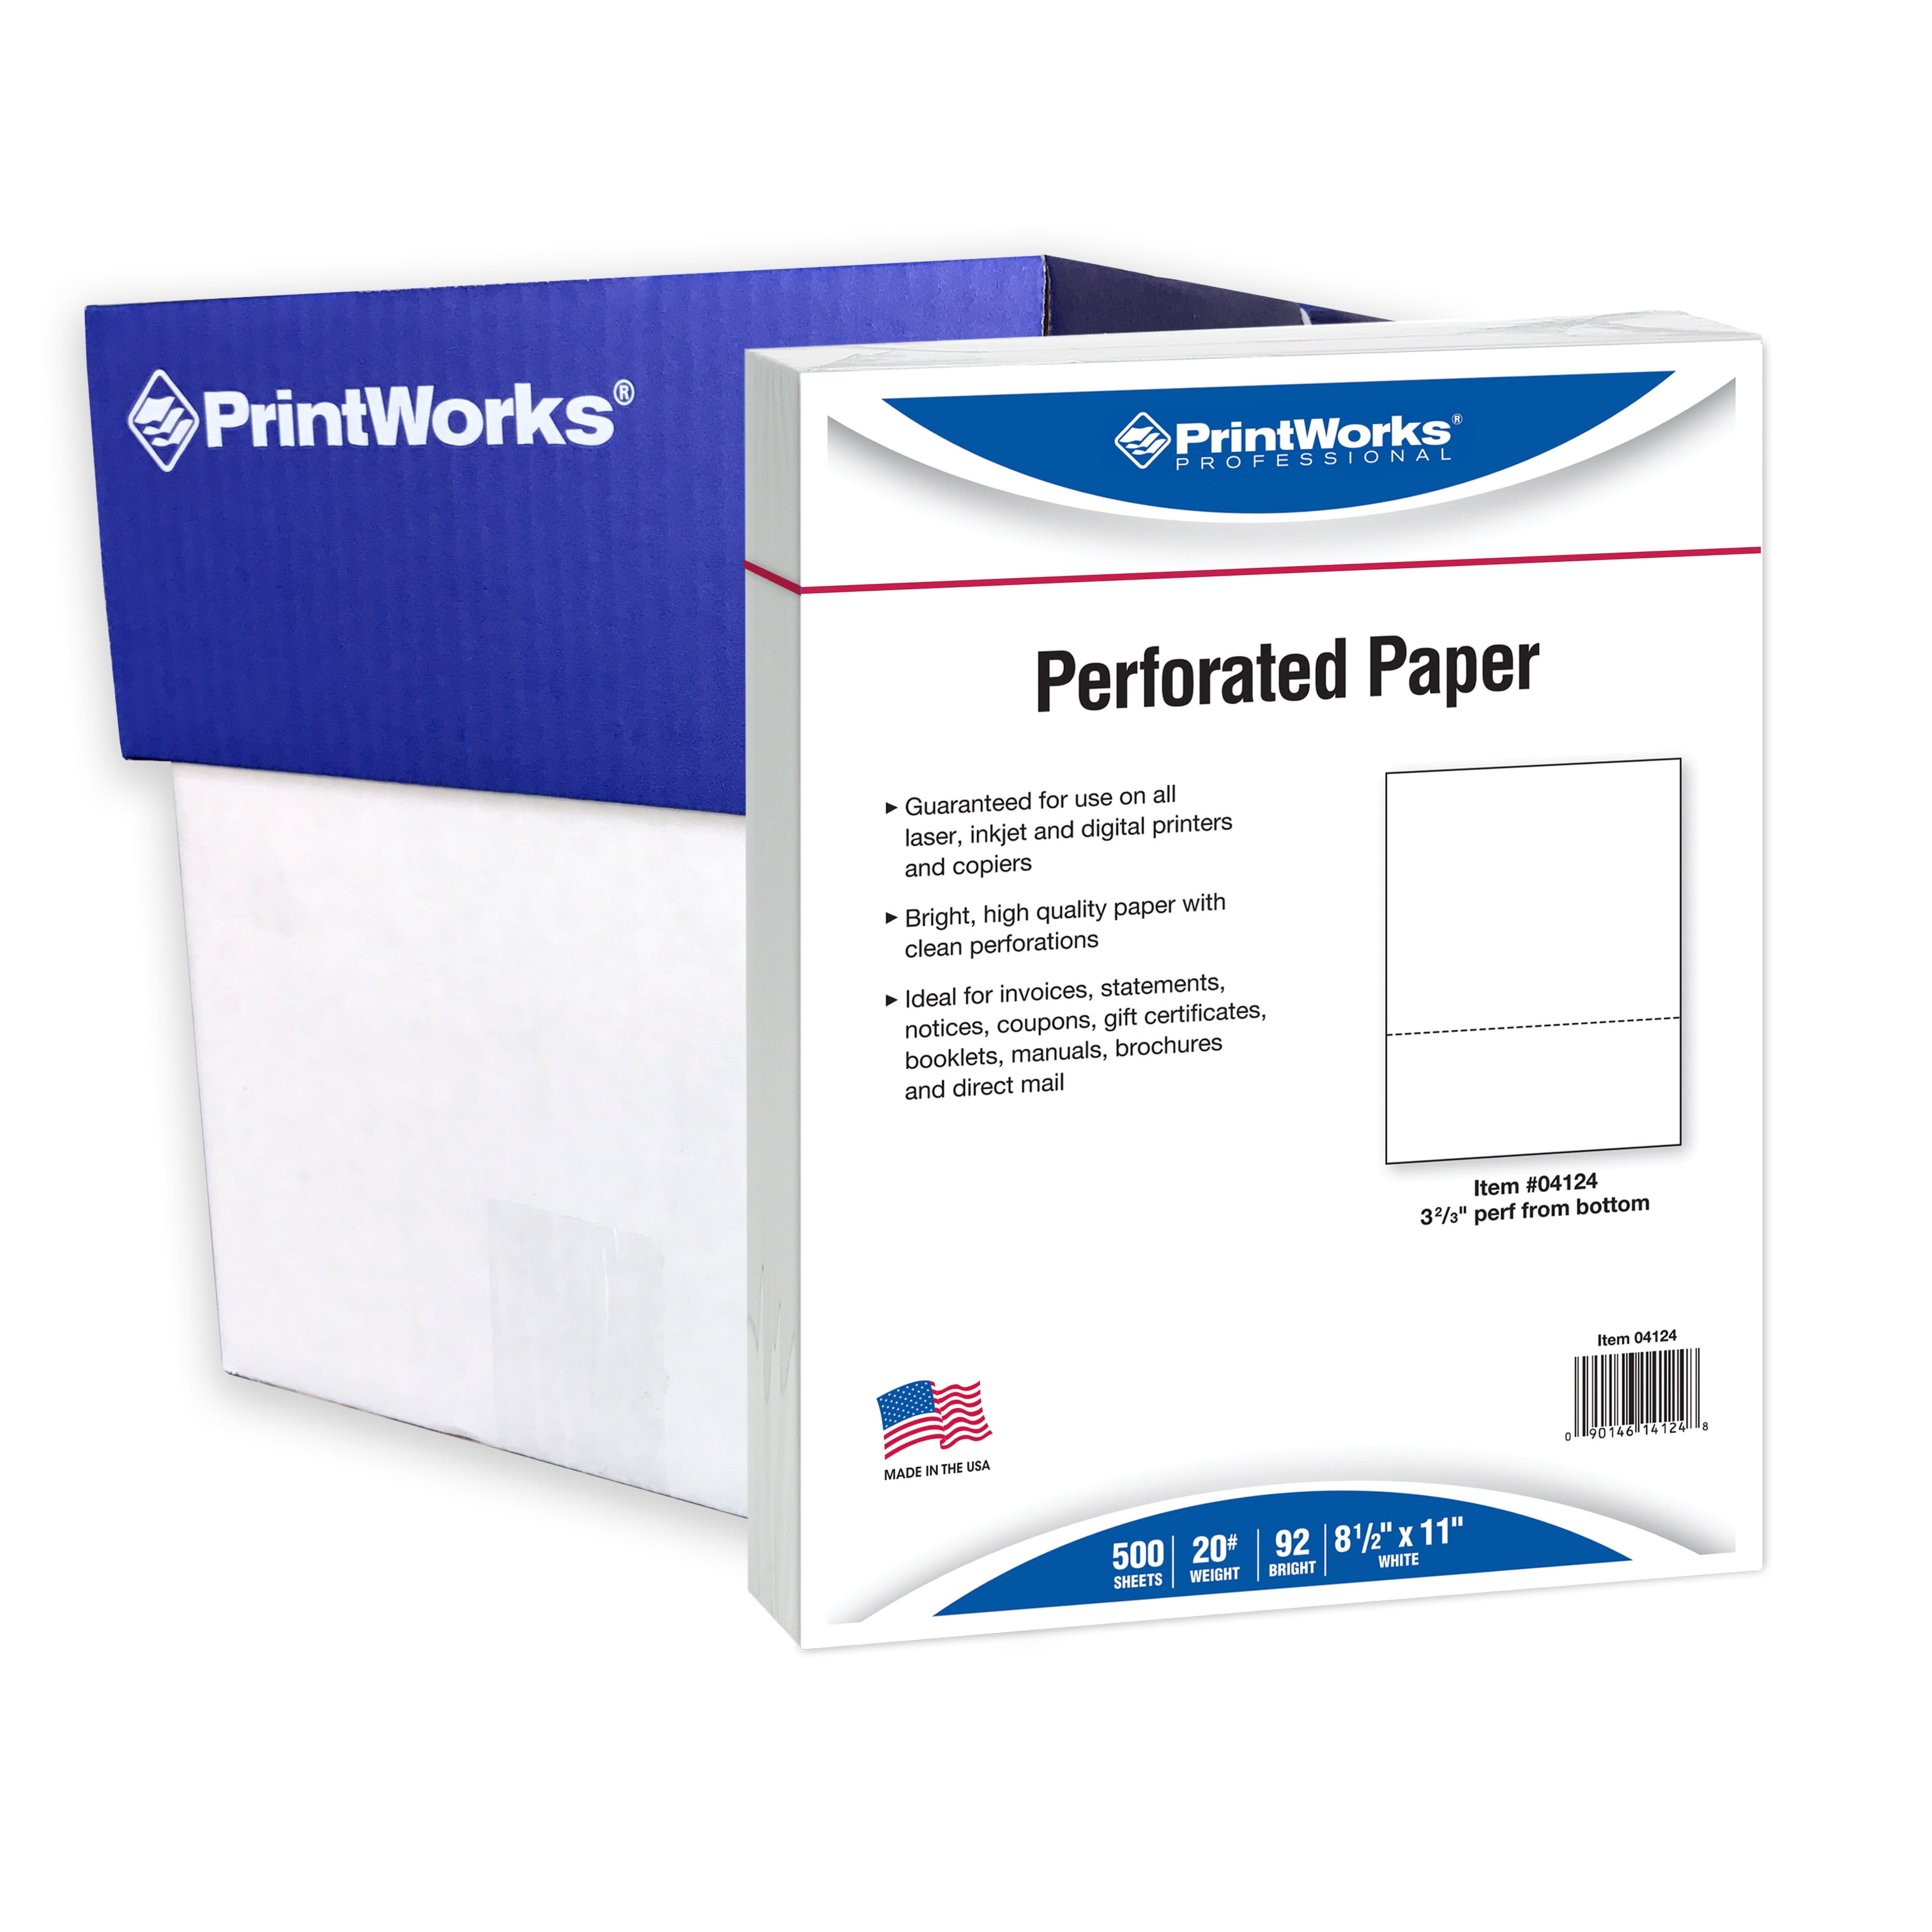 Perforated Paper, 8.5 x 11, 20 lb, 3 2/3" Perf, 2500 Shts, 04124 -